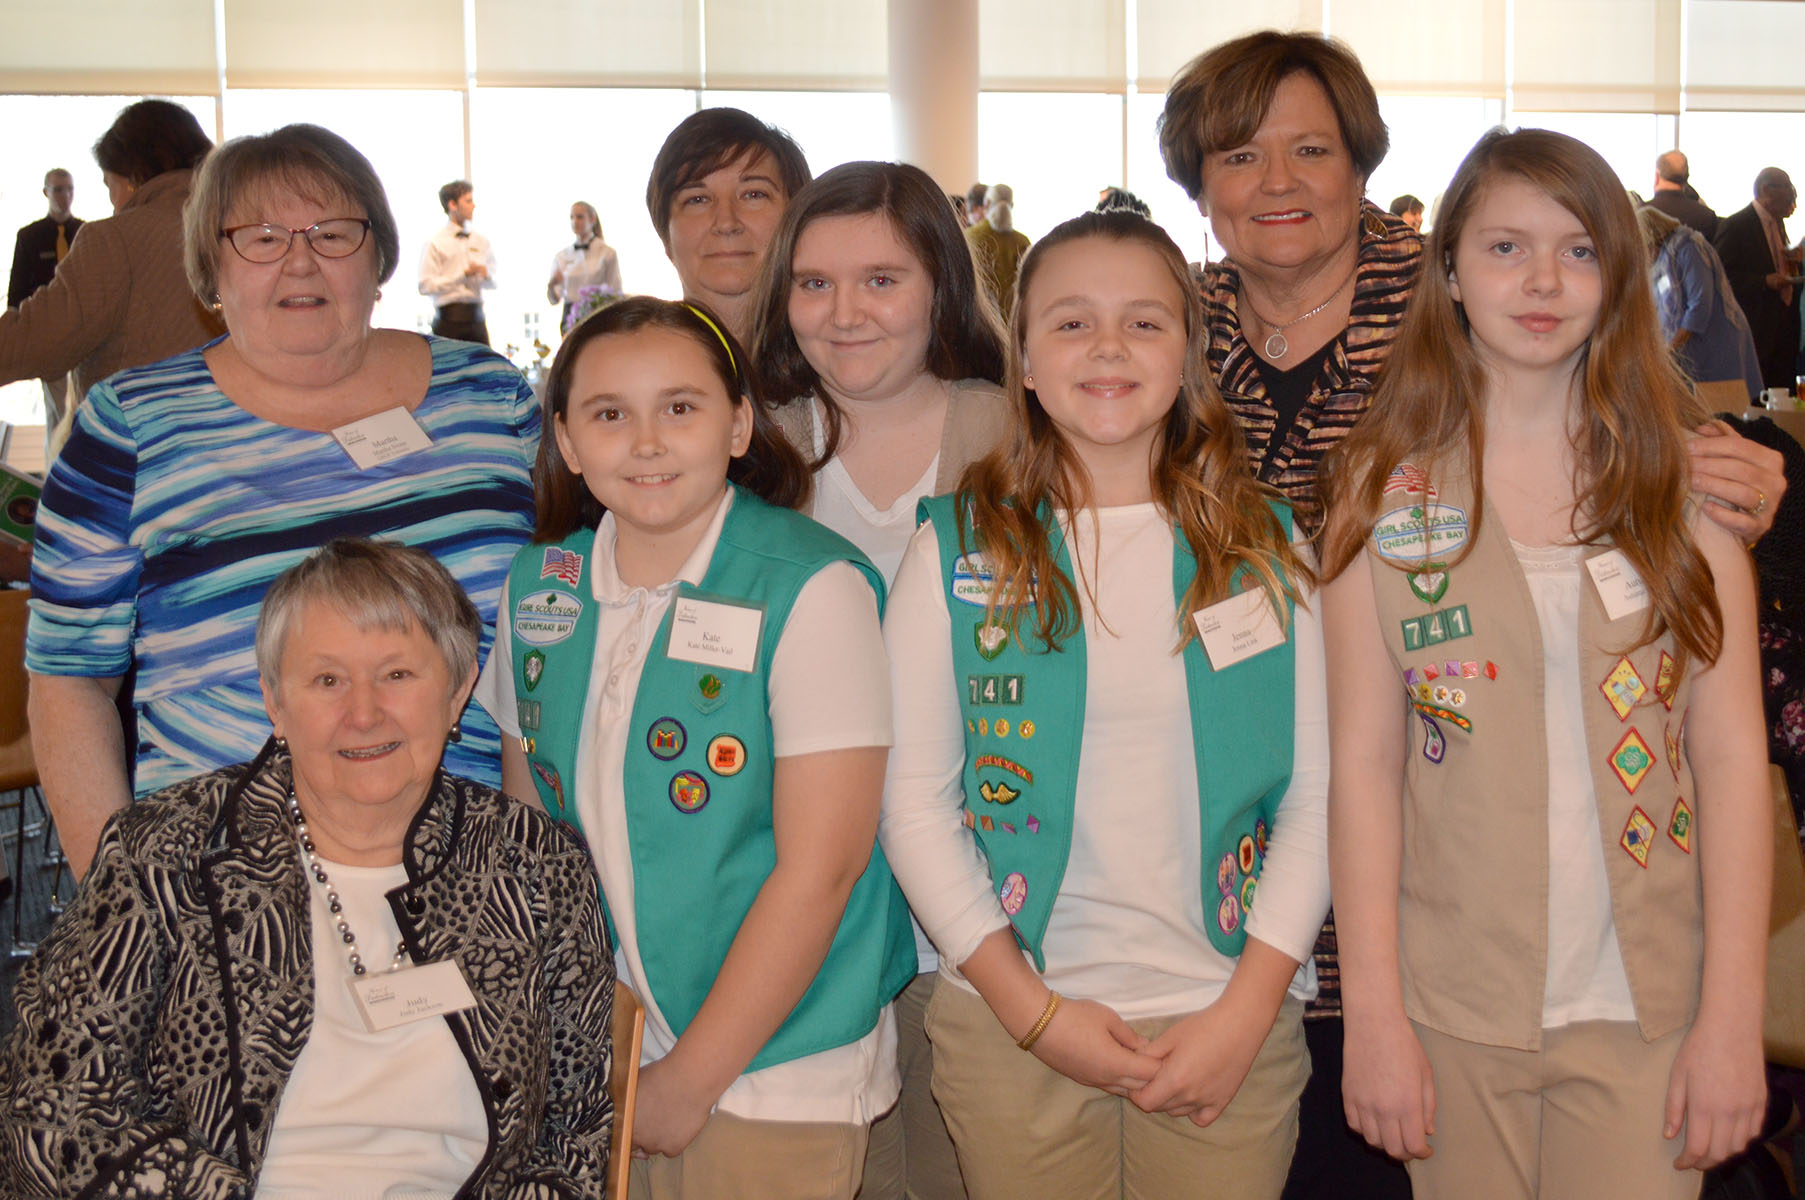 Girl Scouts of the Chesapeake Bay Lower Shore Woman of Distinction dinner